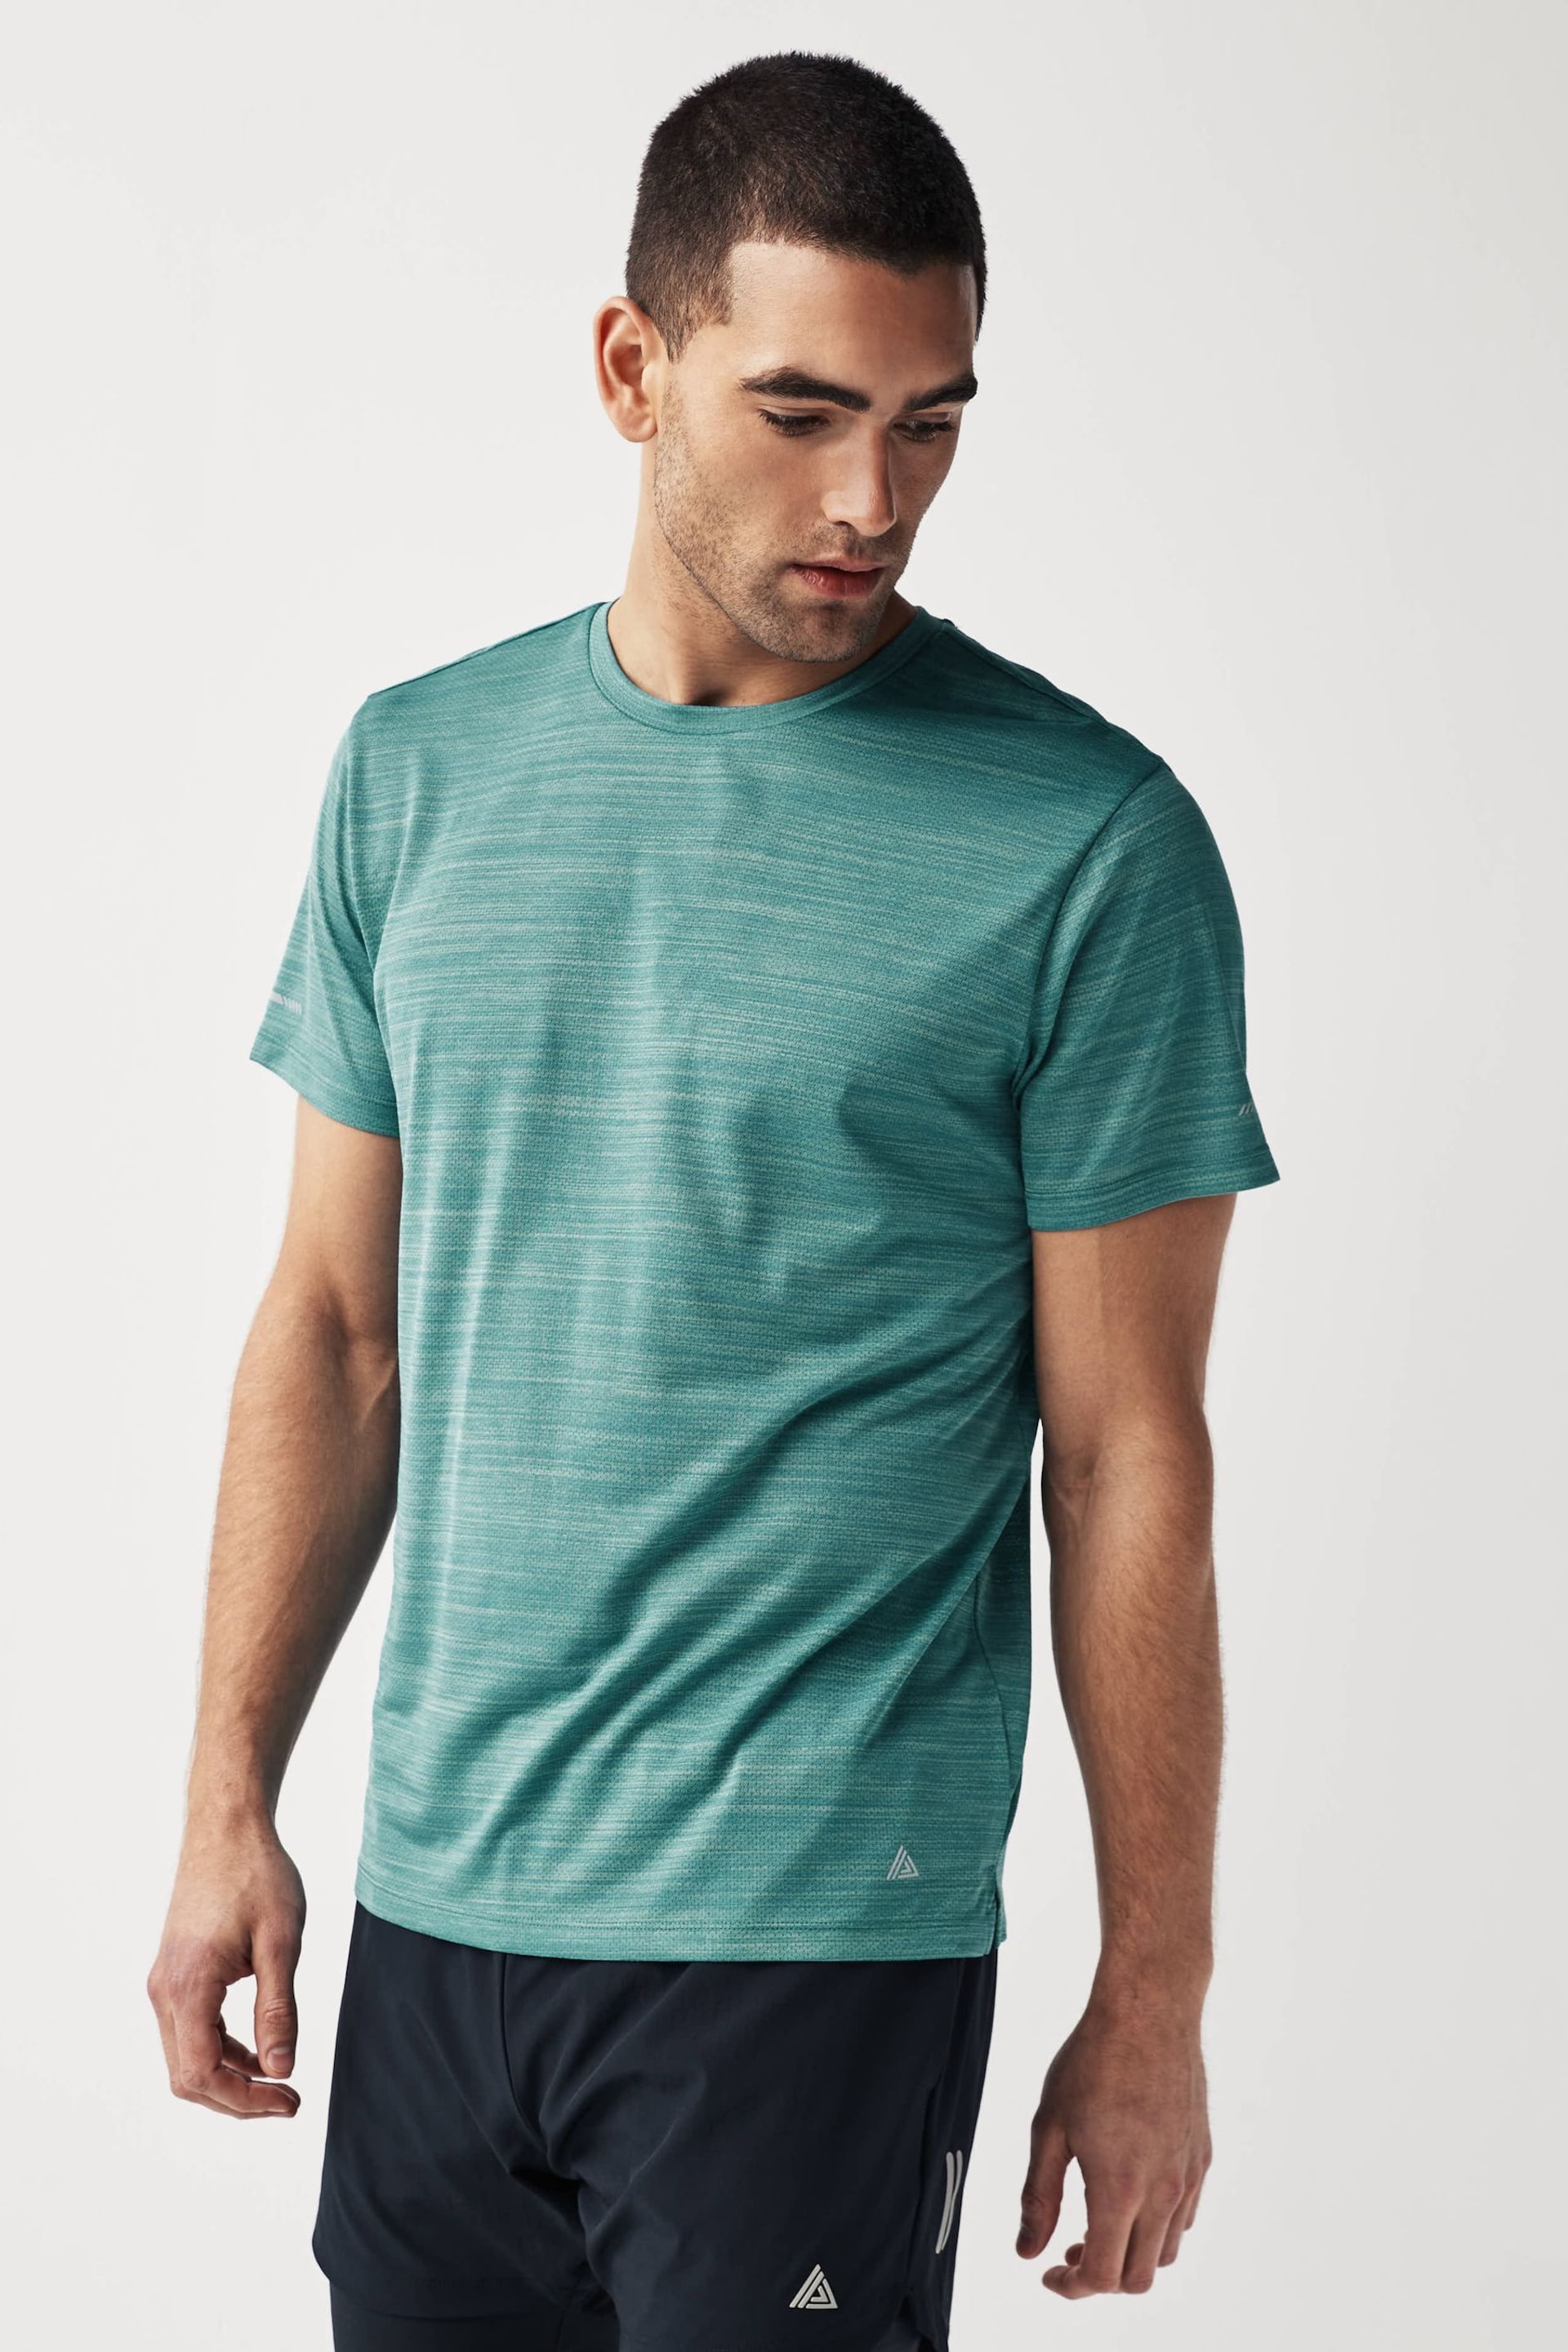 Teal Blue Active Mesh Training T-Shirt - Image 3 of 8